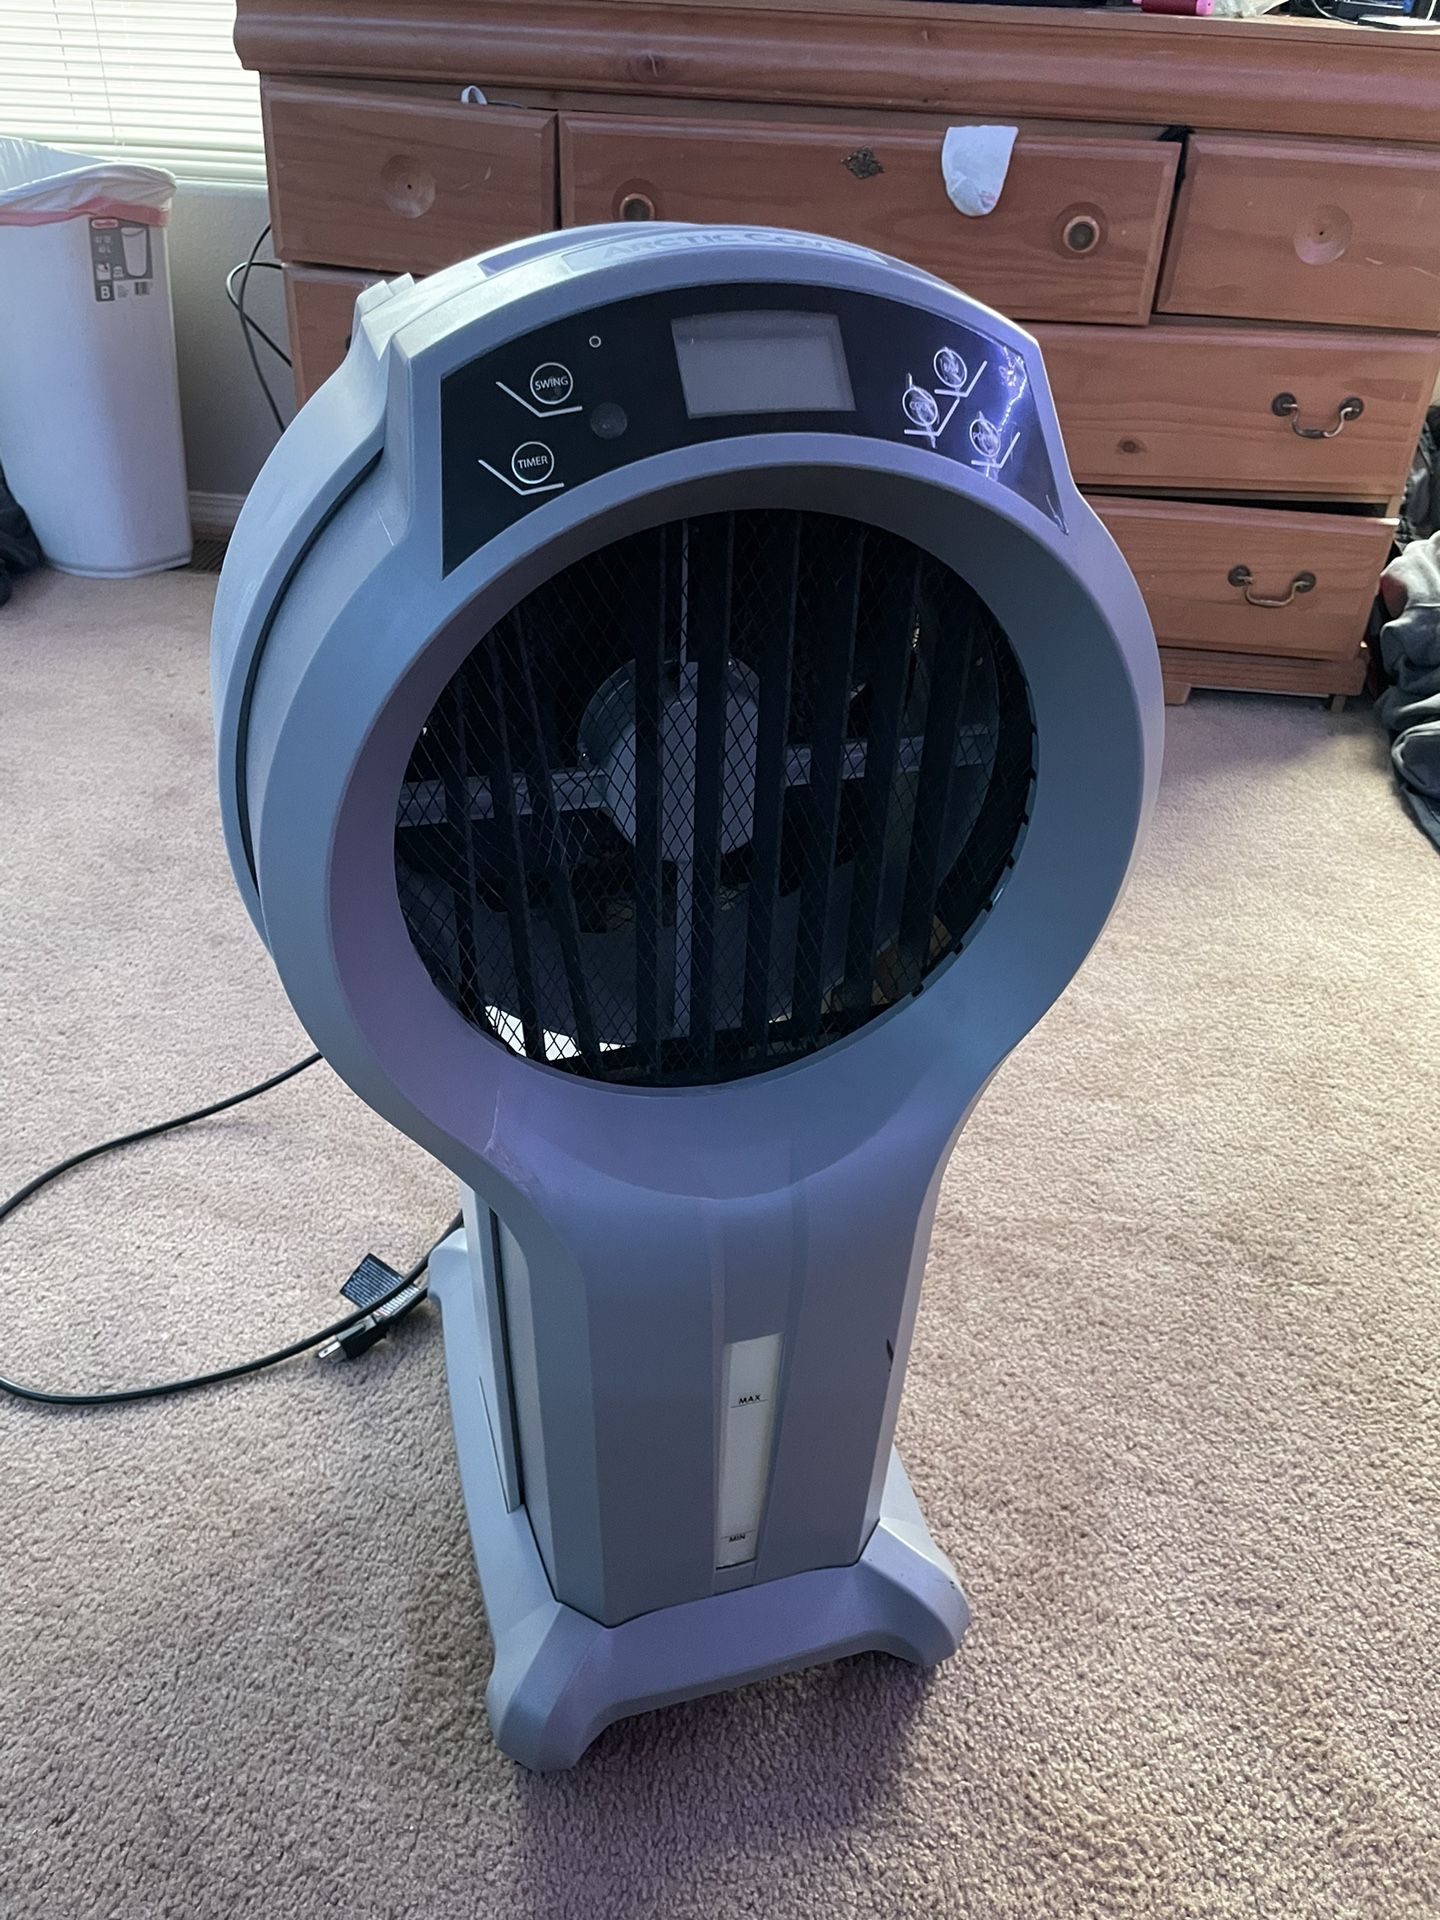 Artic Cold Cooling Fan